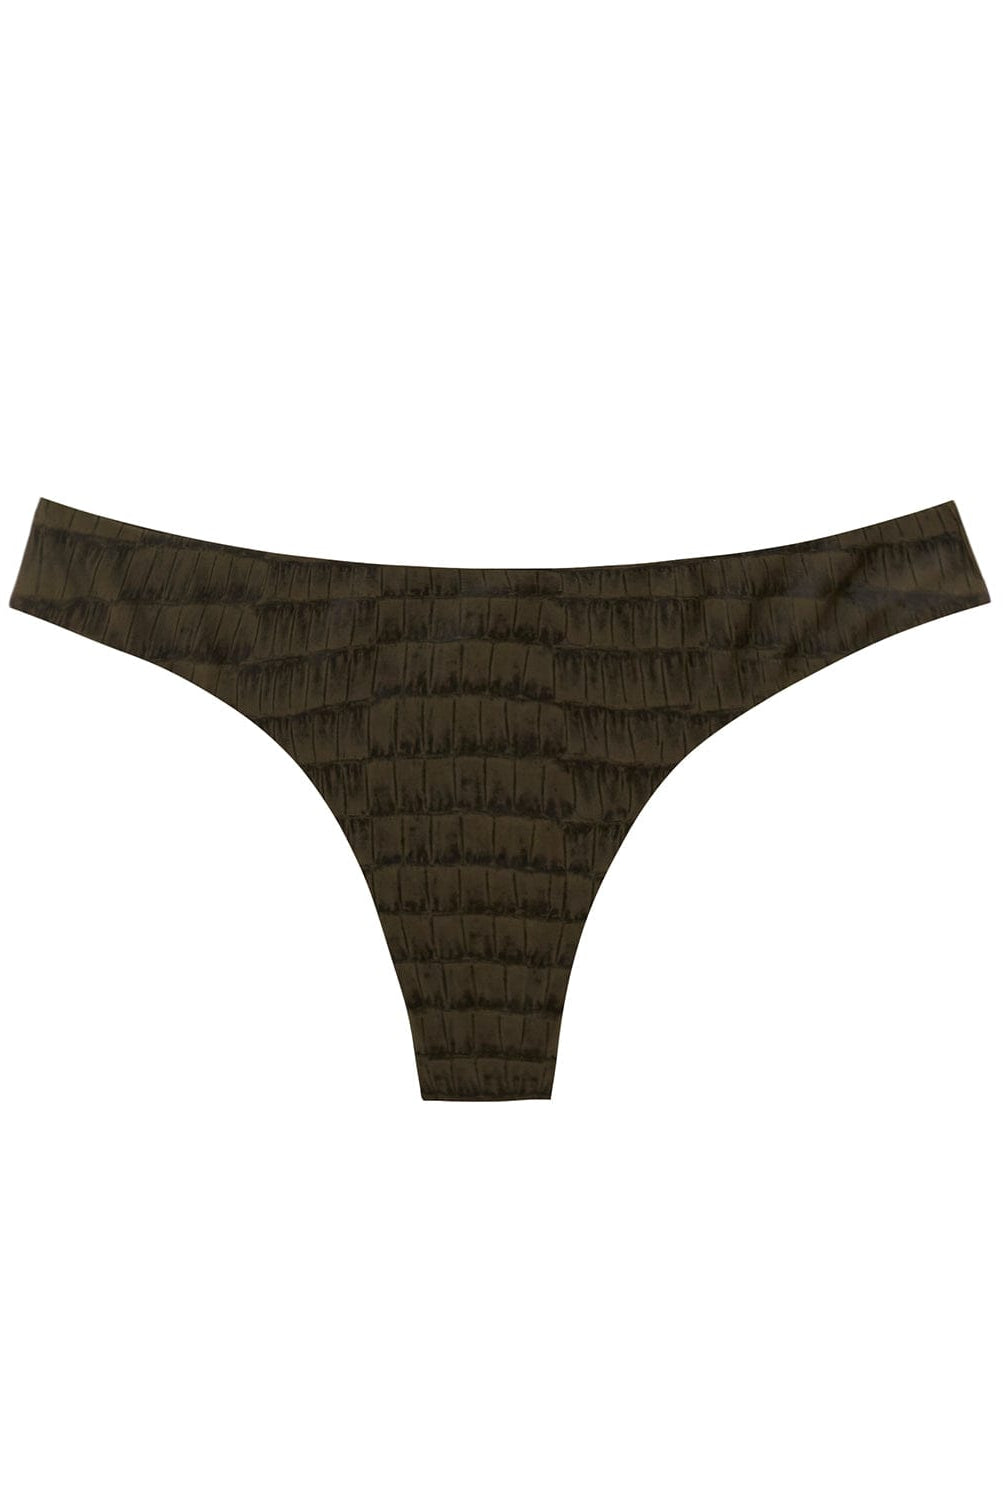 A gray print ruched bikini bottom. Featured against a white wall background.